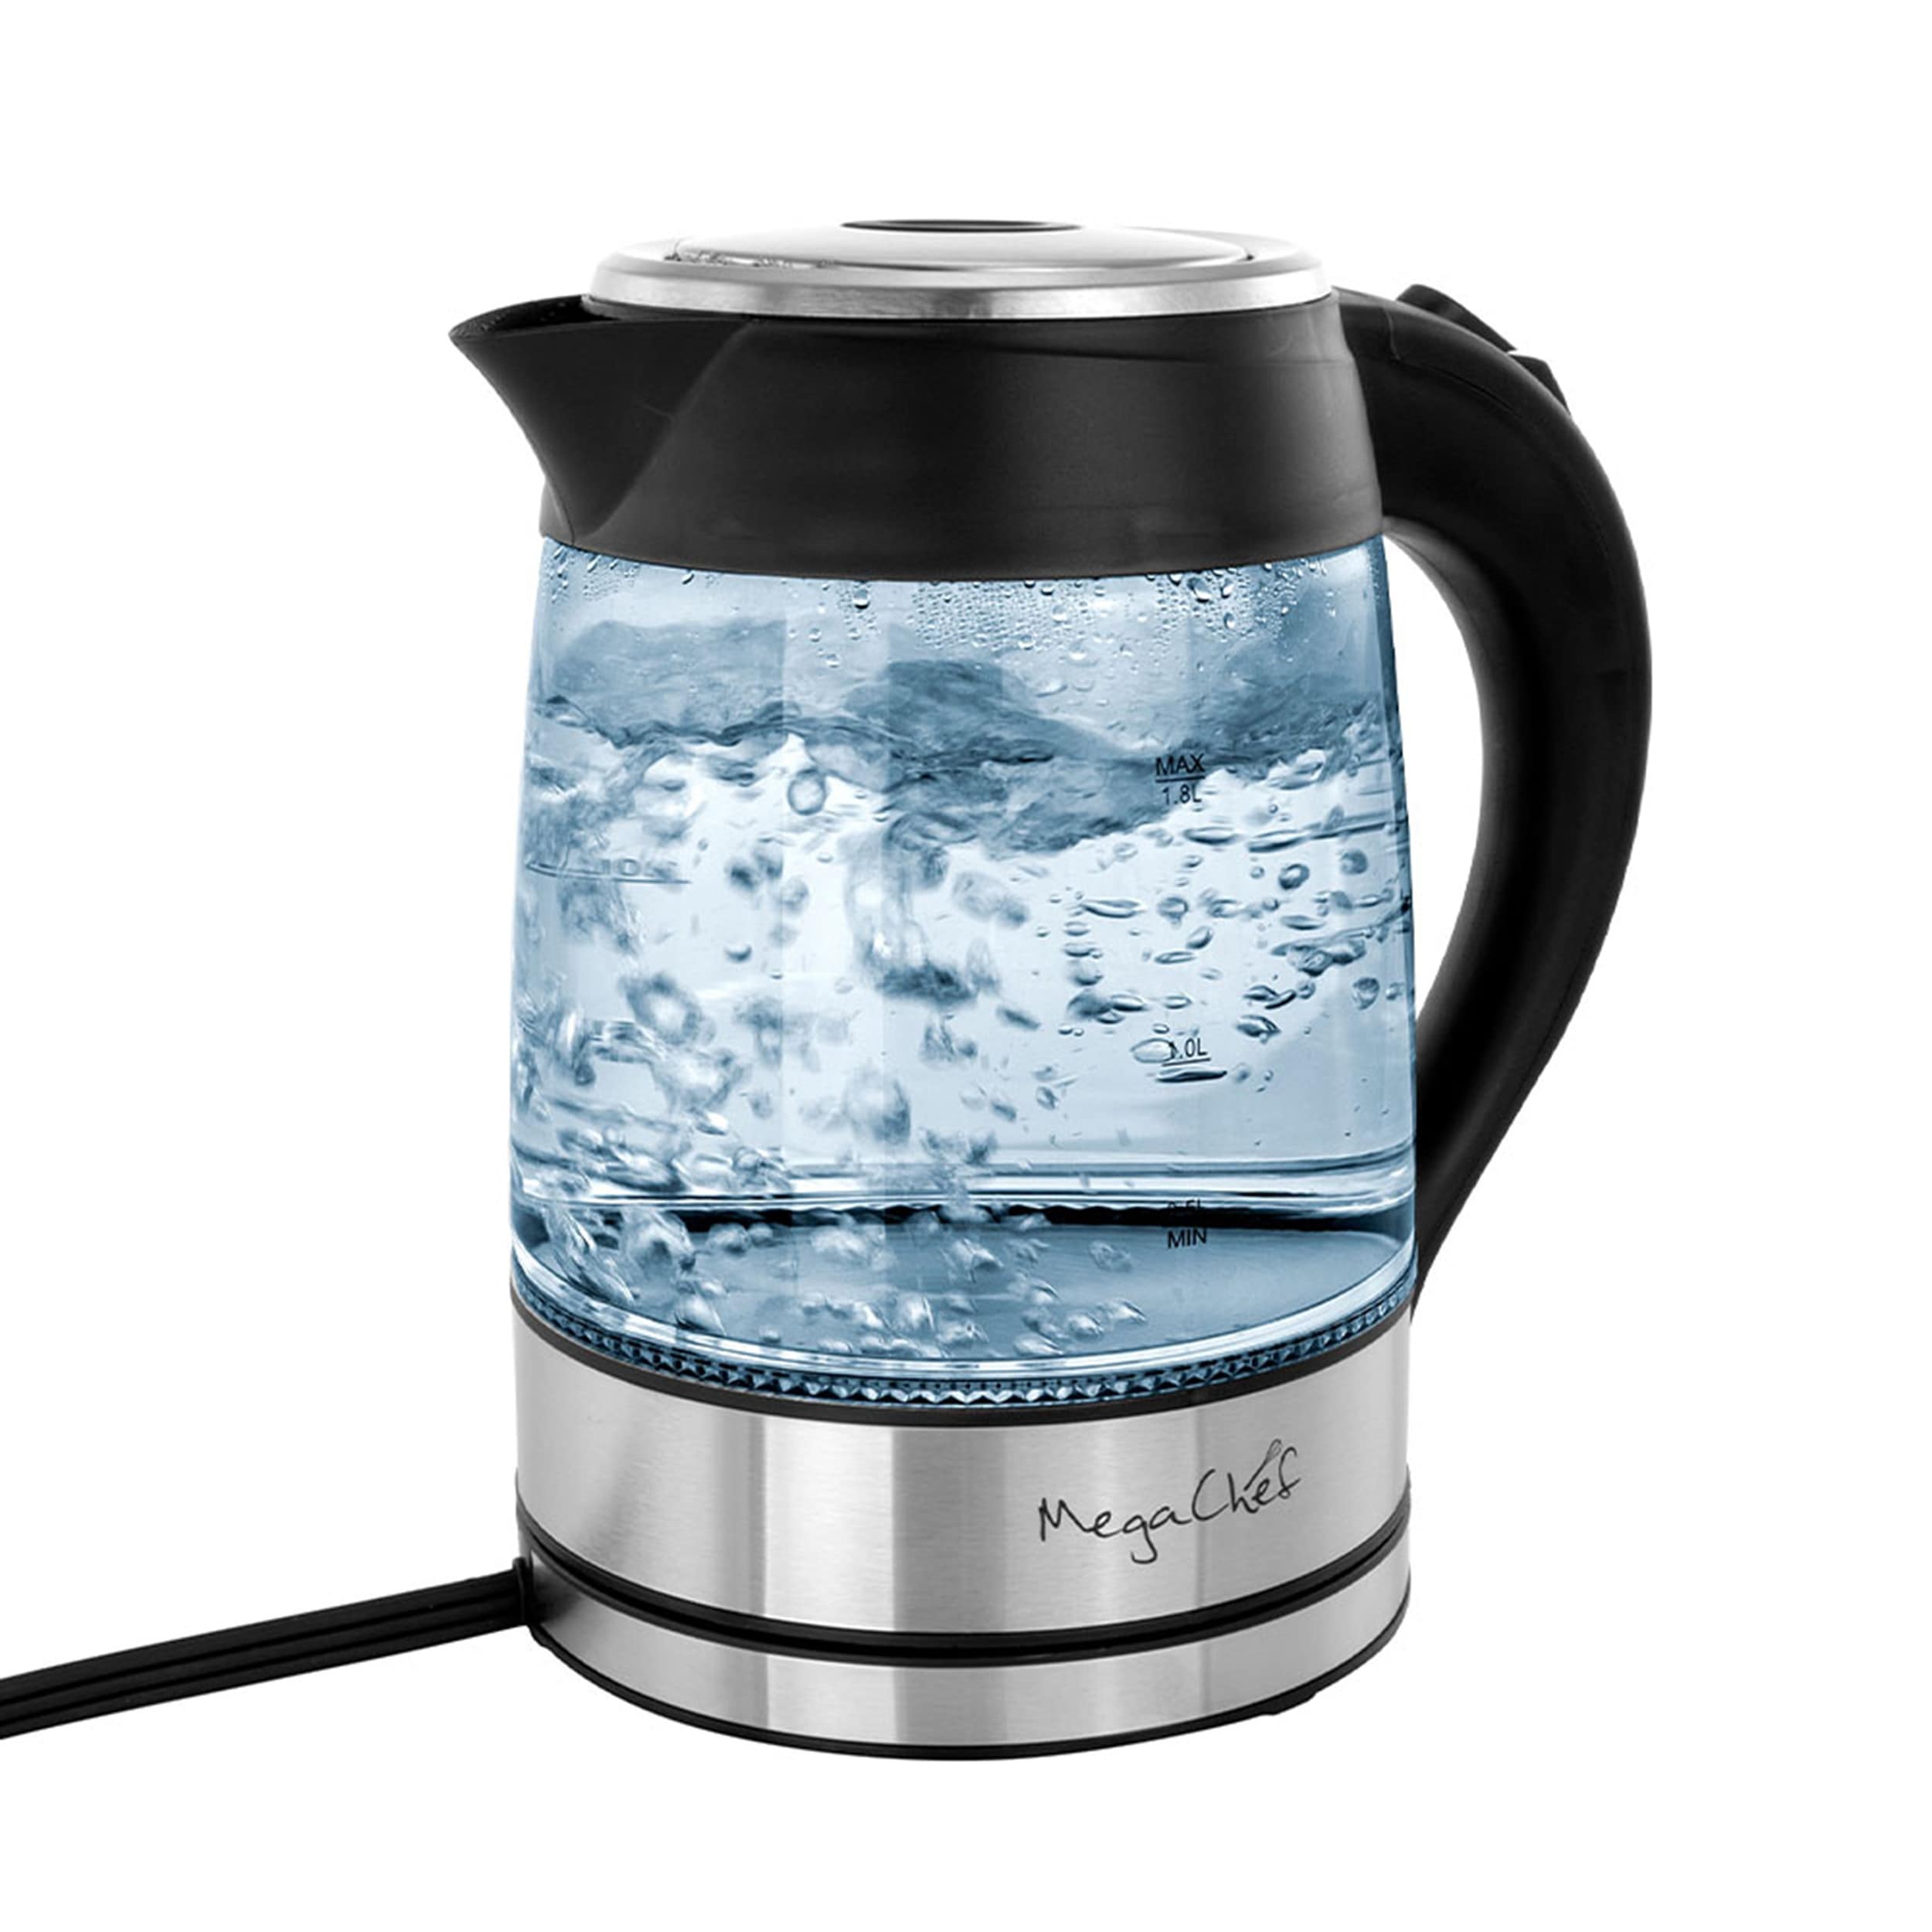 Chefman Glass Electric Kettle for Boiling Water, 1.8L 1500W, with Tea  Infuser, Keep Warm Function, Auto Shut Off, Boil-Dry Protection, BPA Free,  Hot